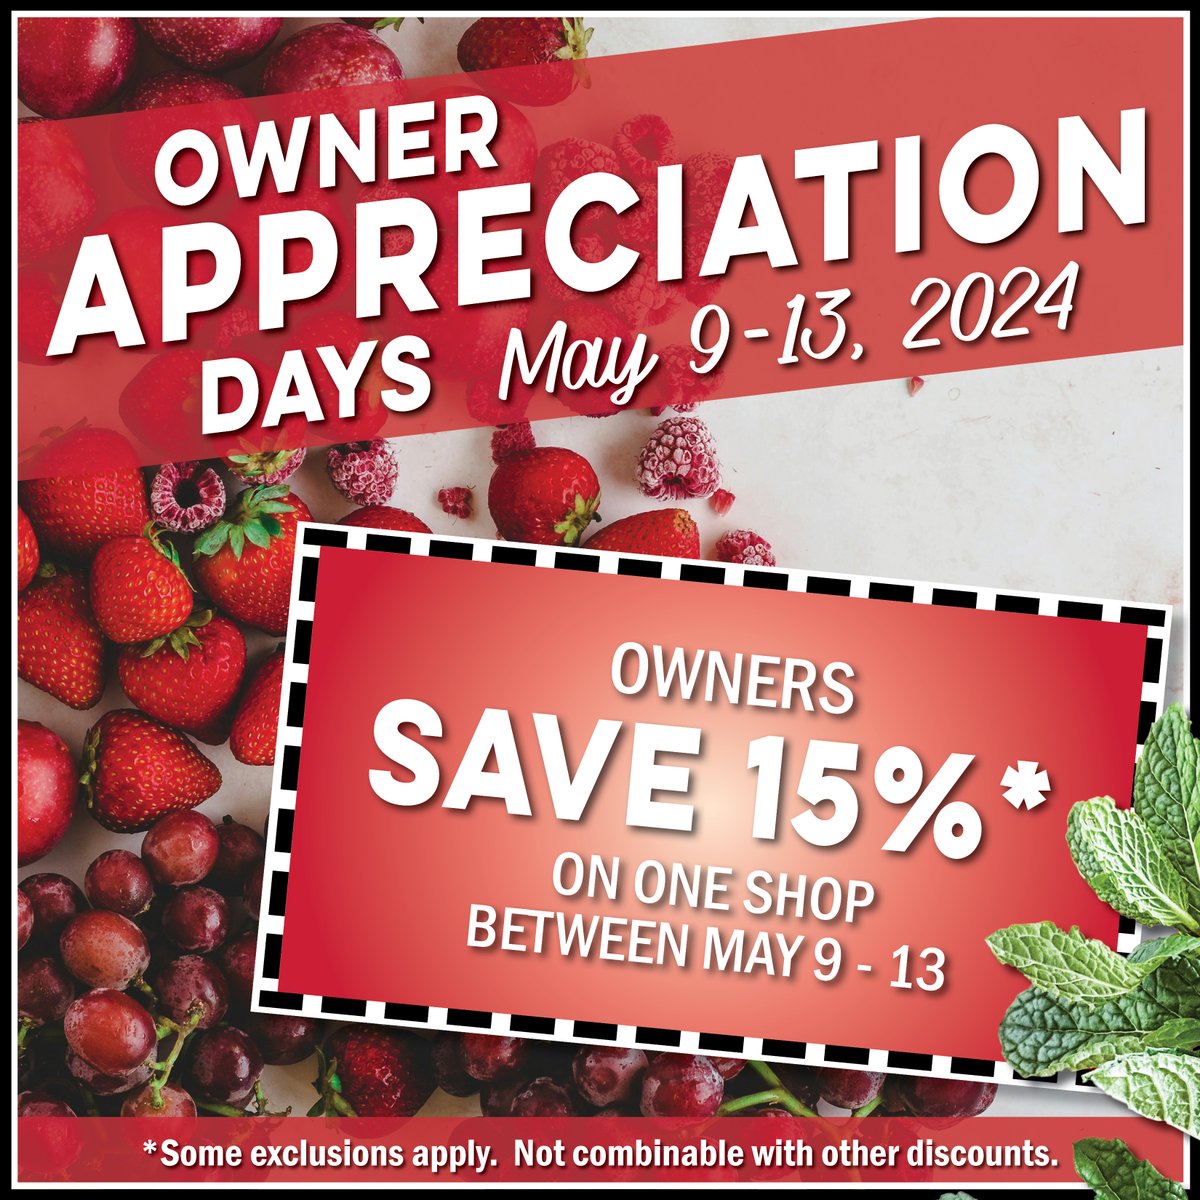 Owner Appreciation Days are right around the corner! Choose your Owner Appreciation Day anytime between May 9 to 13. #ownerappreciation #oneotacoop #foodcoop #decorah #communityowned